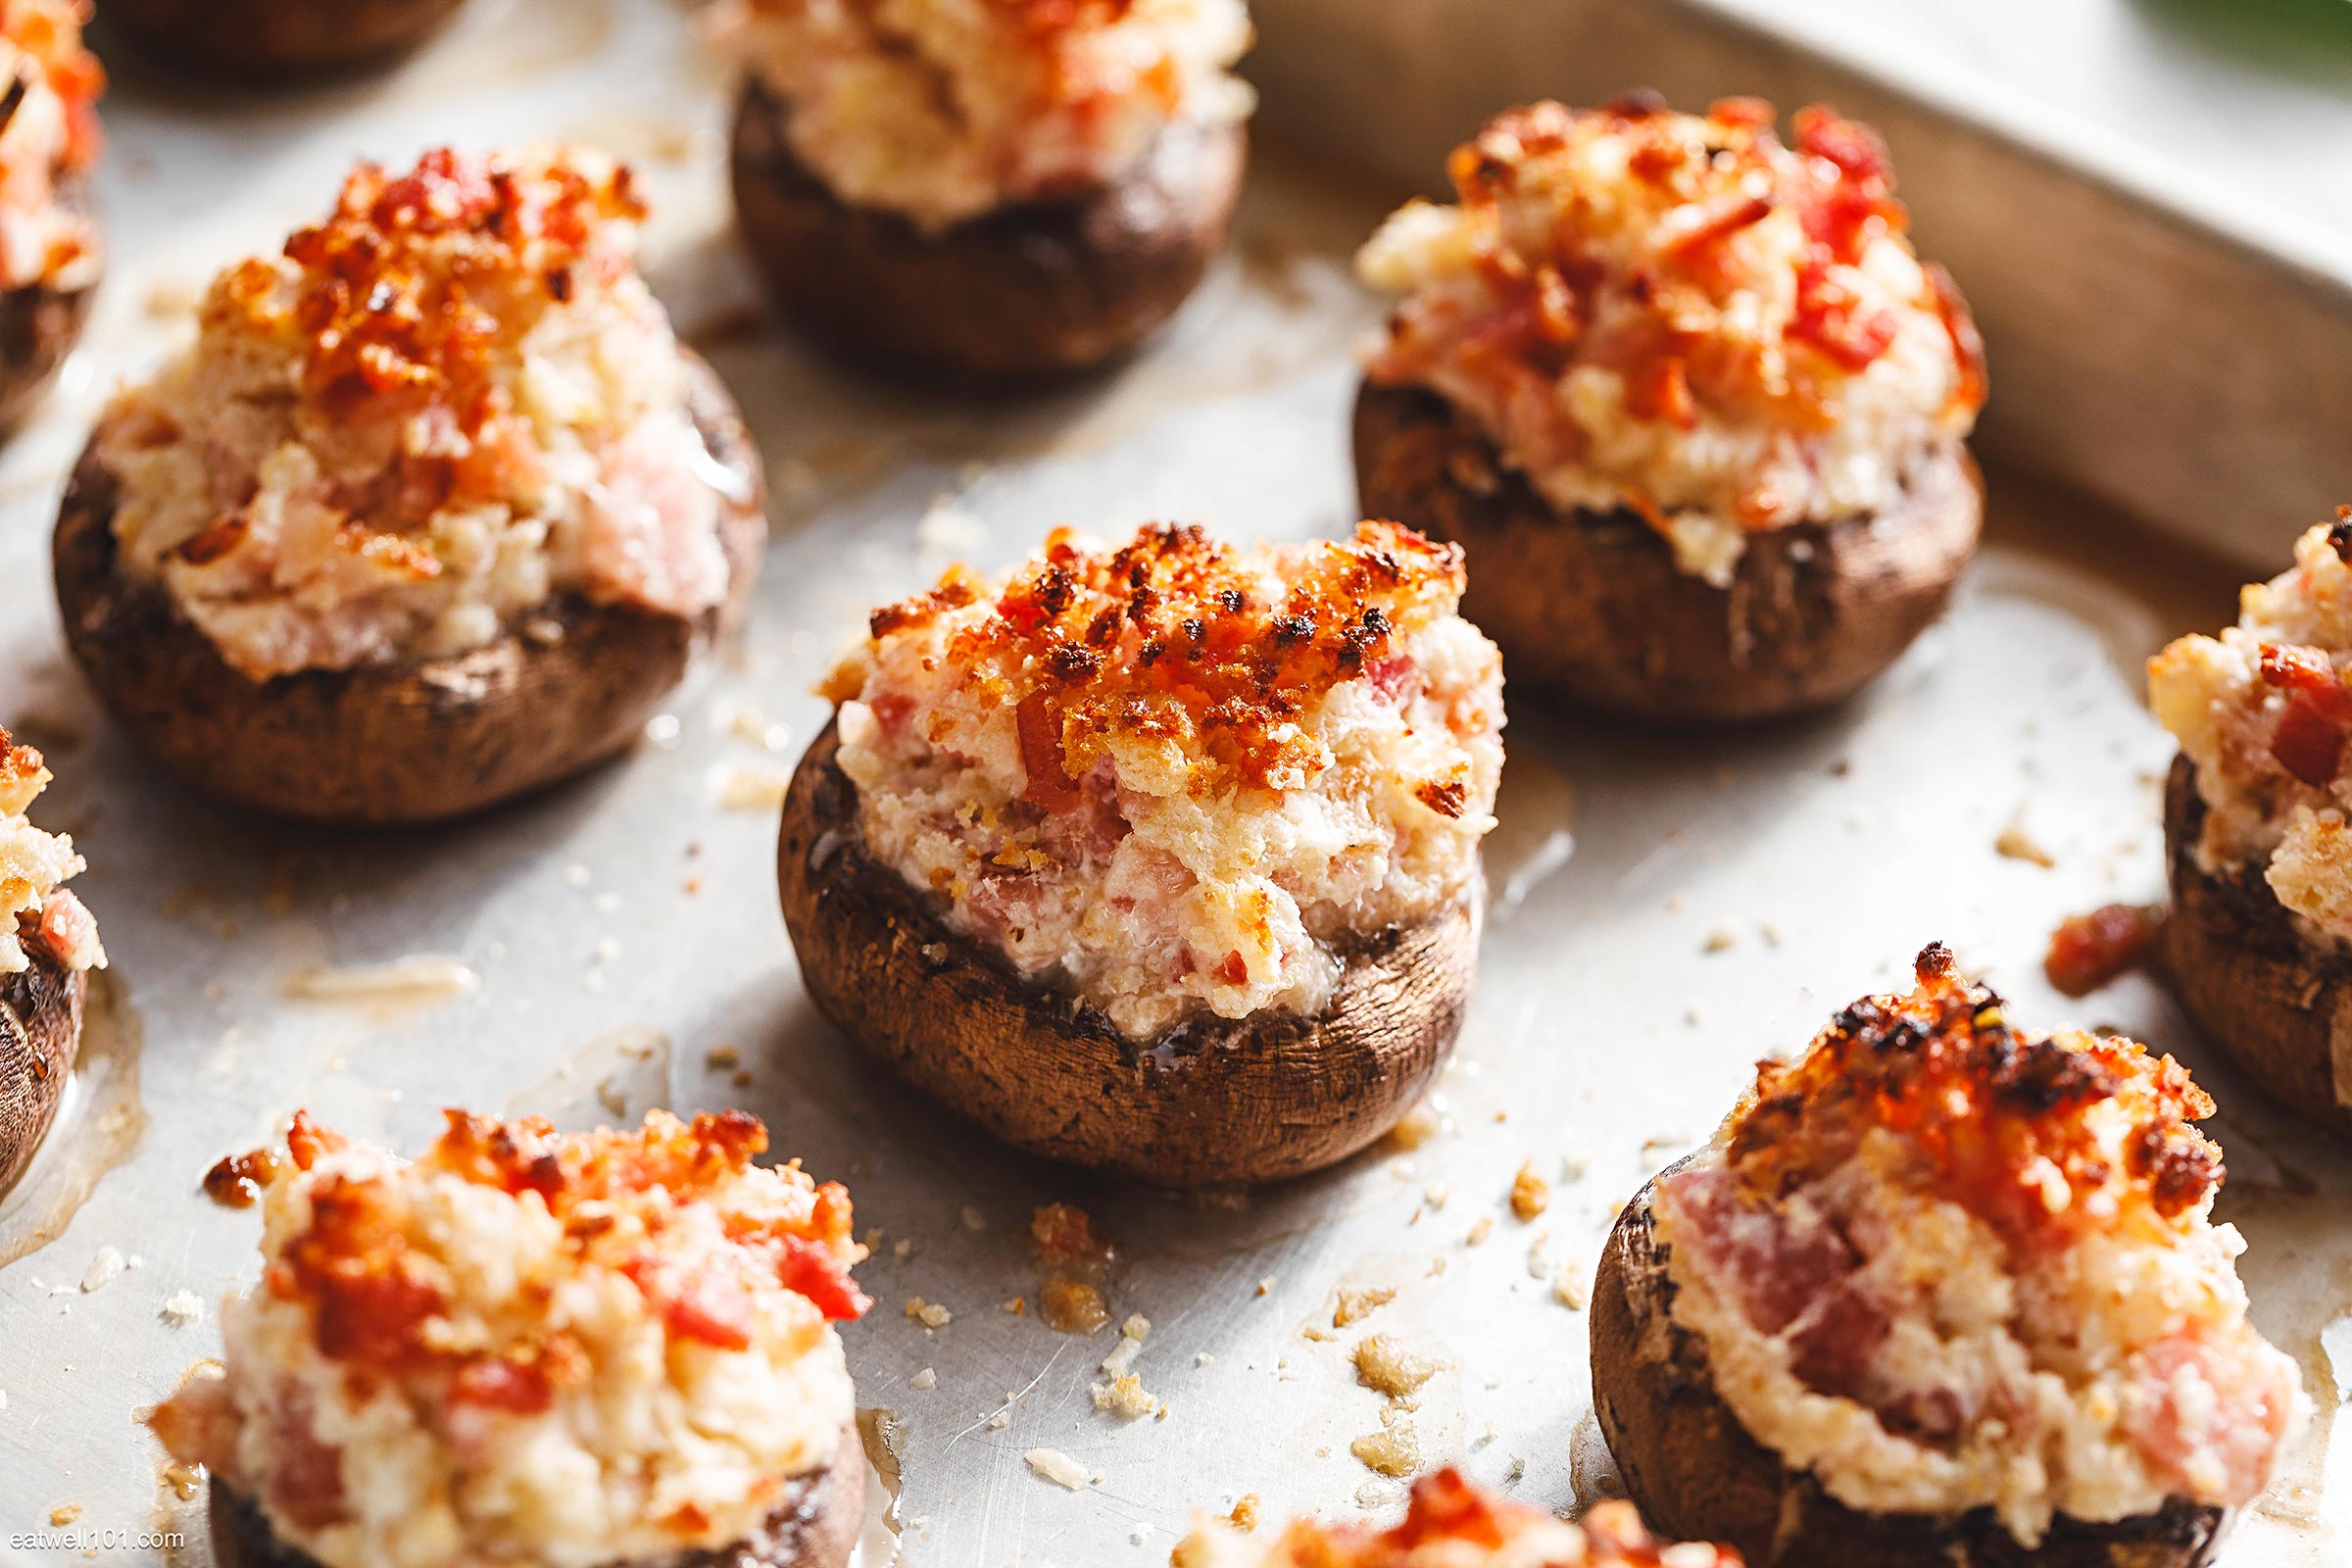 Baked Stuffed Mushrooms with Cream Cheese and Bacon